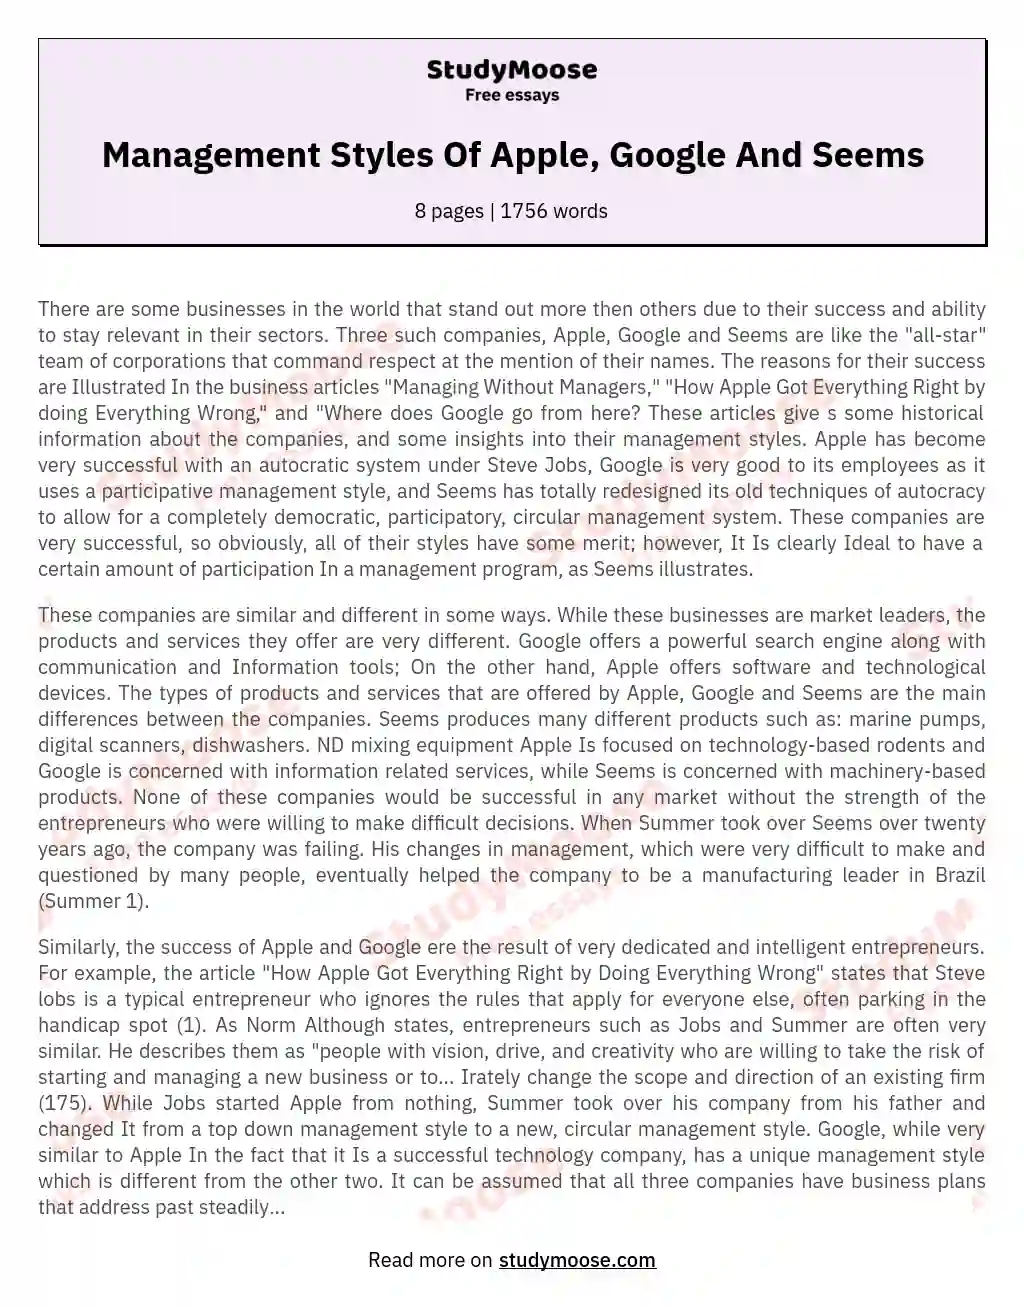 Management Styles Of Apple, Google And Seems essay